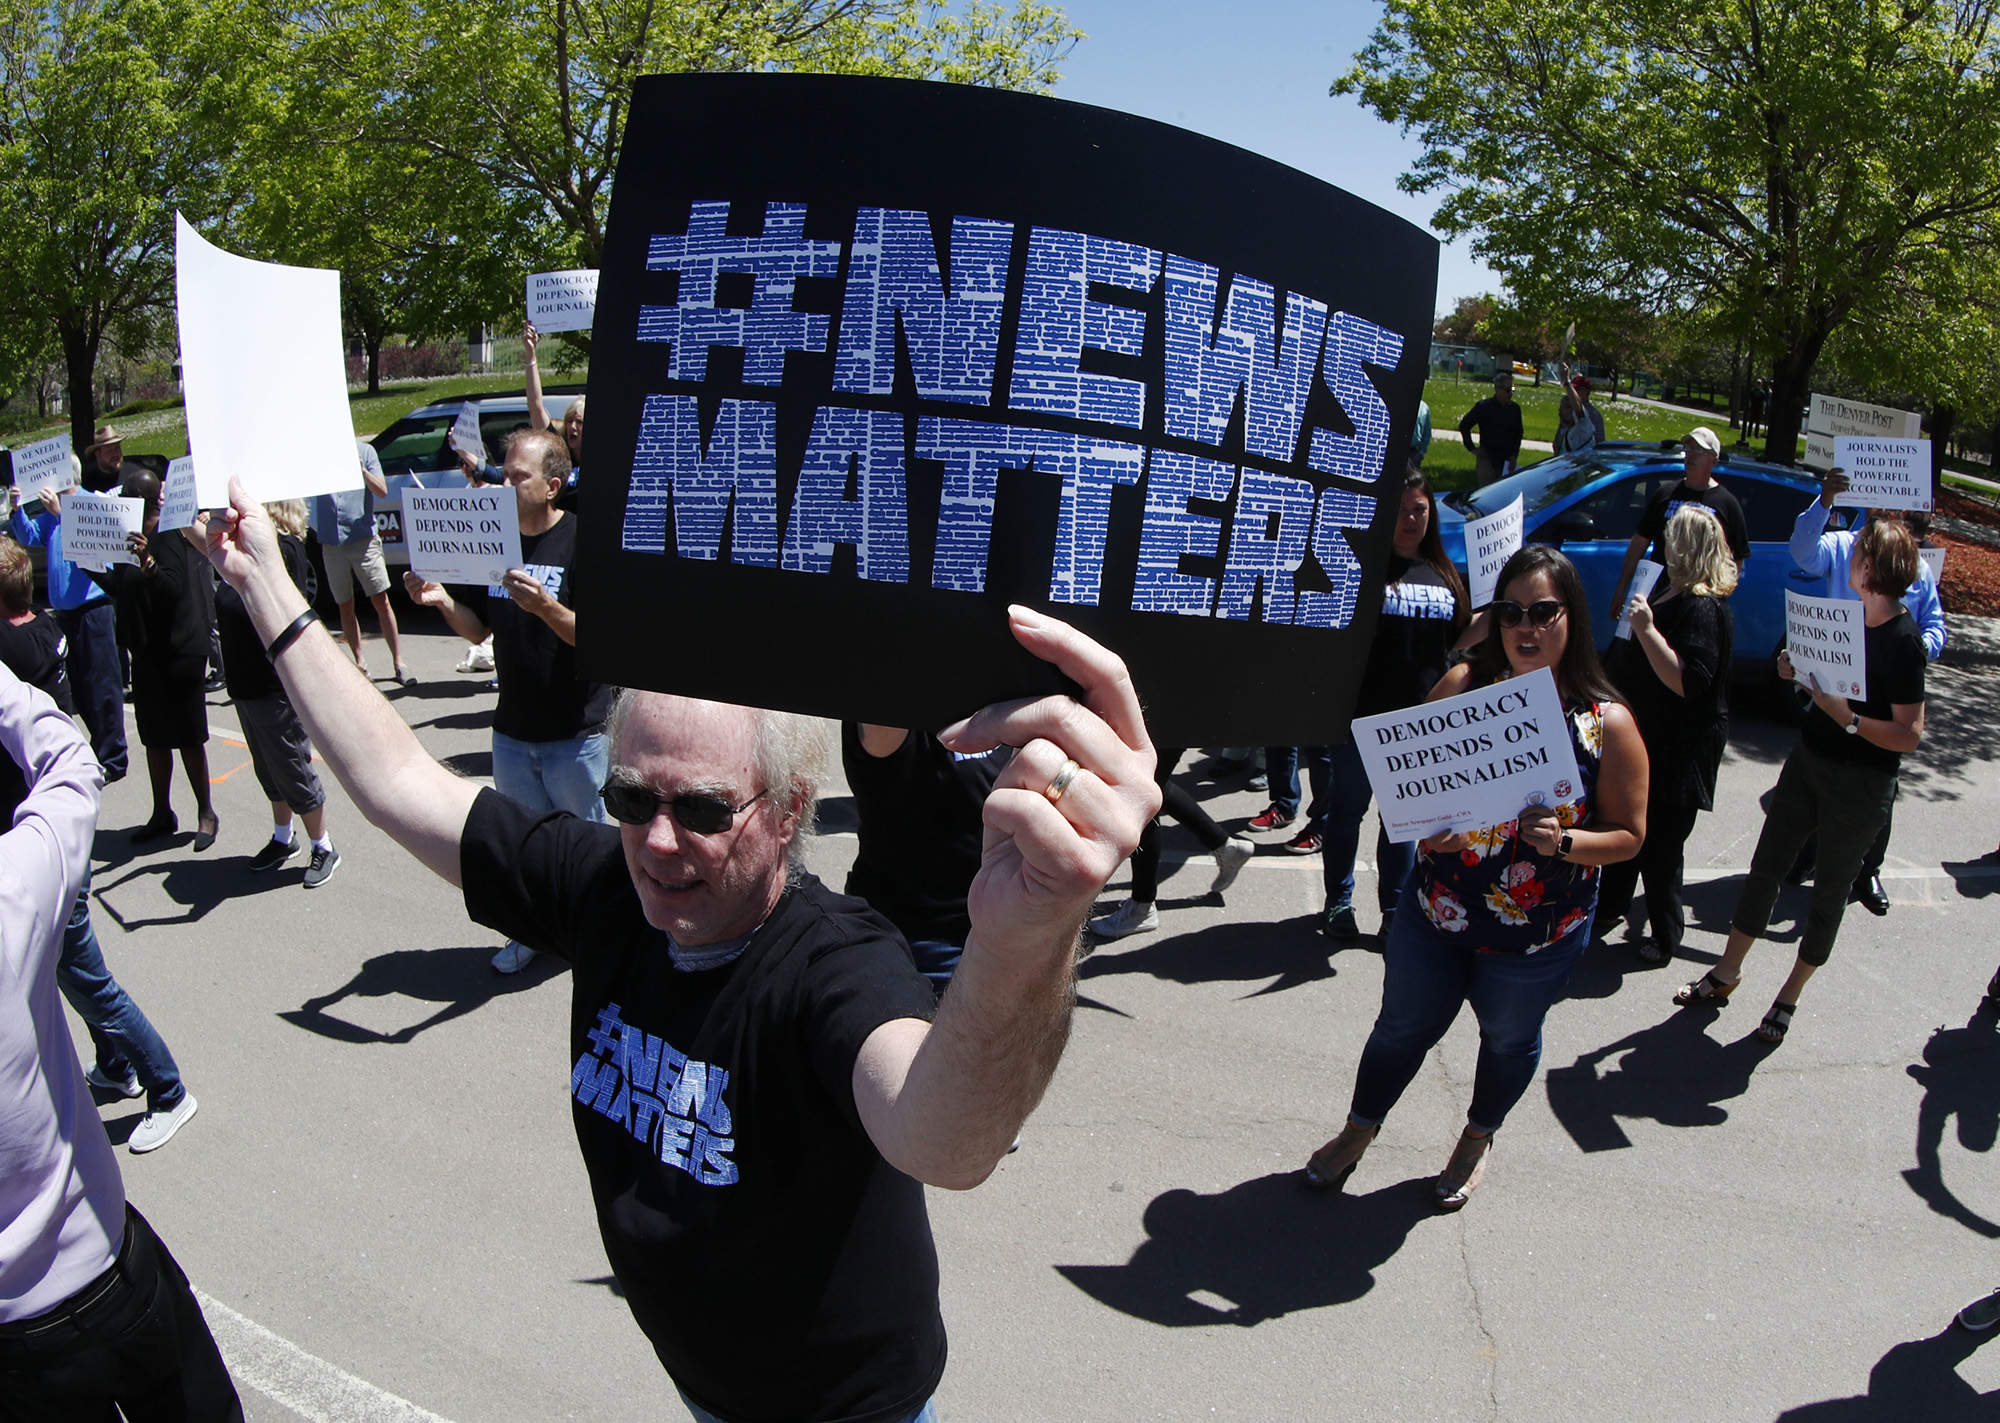 A Denver Post employee during a rally against Alden on May 8.